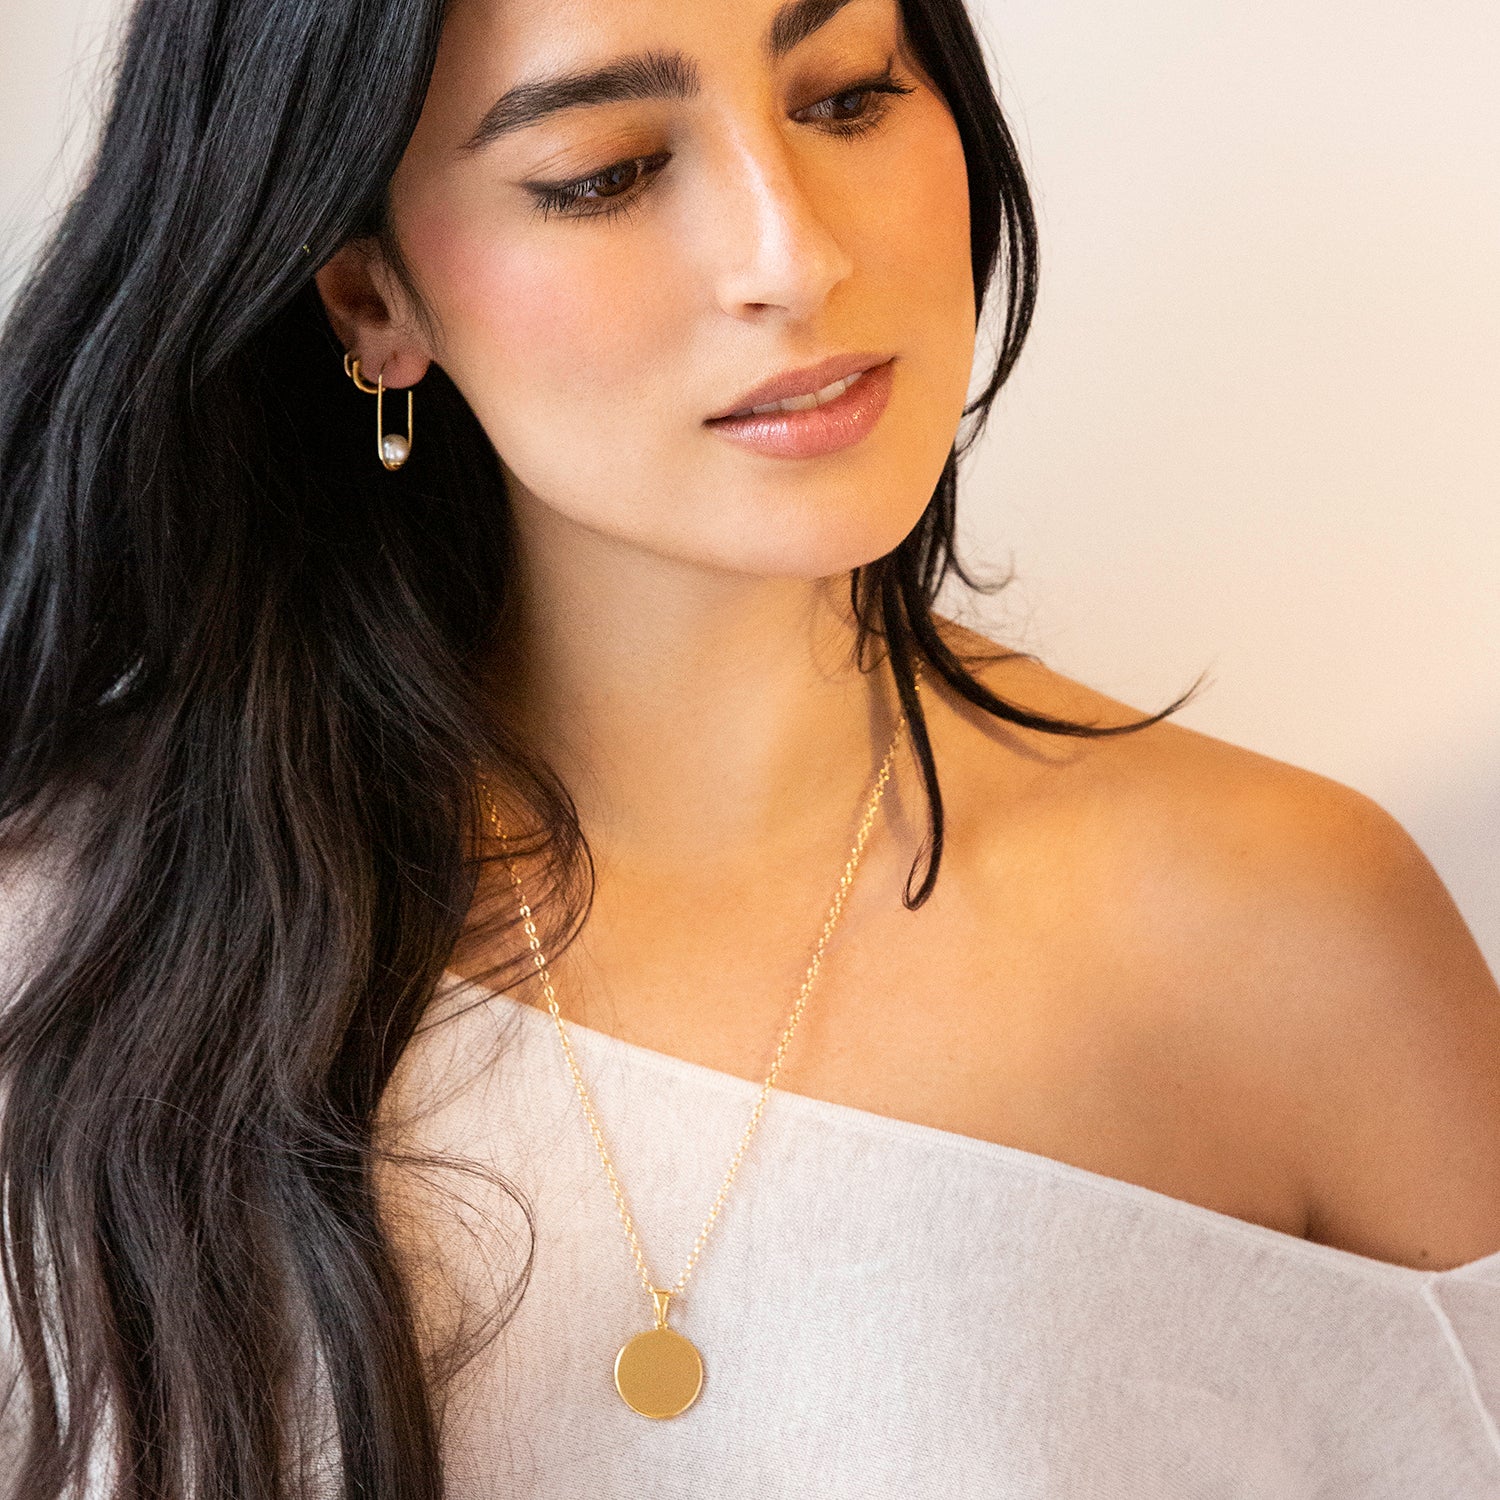 gold plated 16 ball chain necklace – Marlyn Schiff, LLC